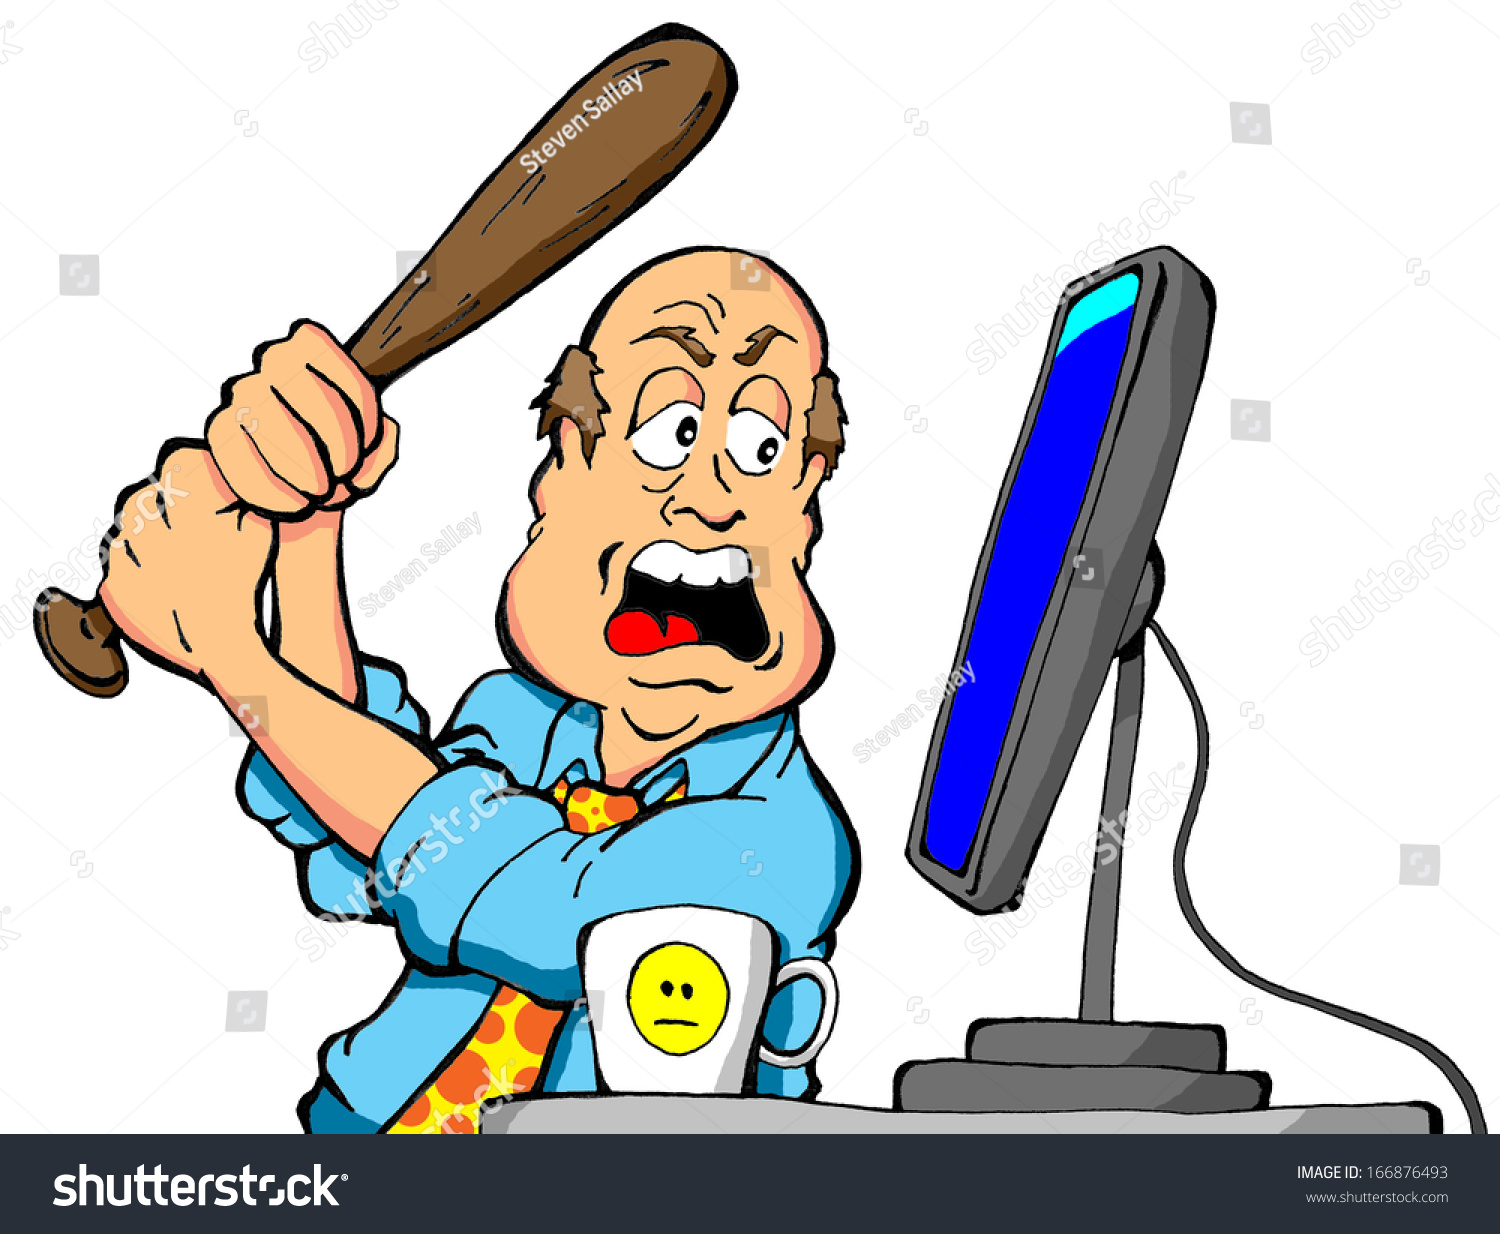 clipart frustrated man - photo #24